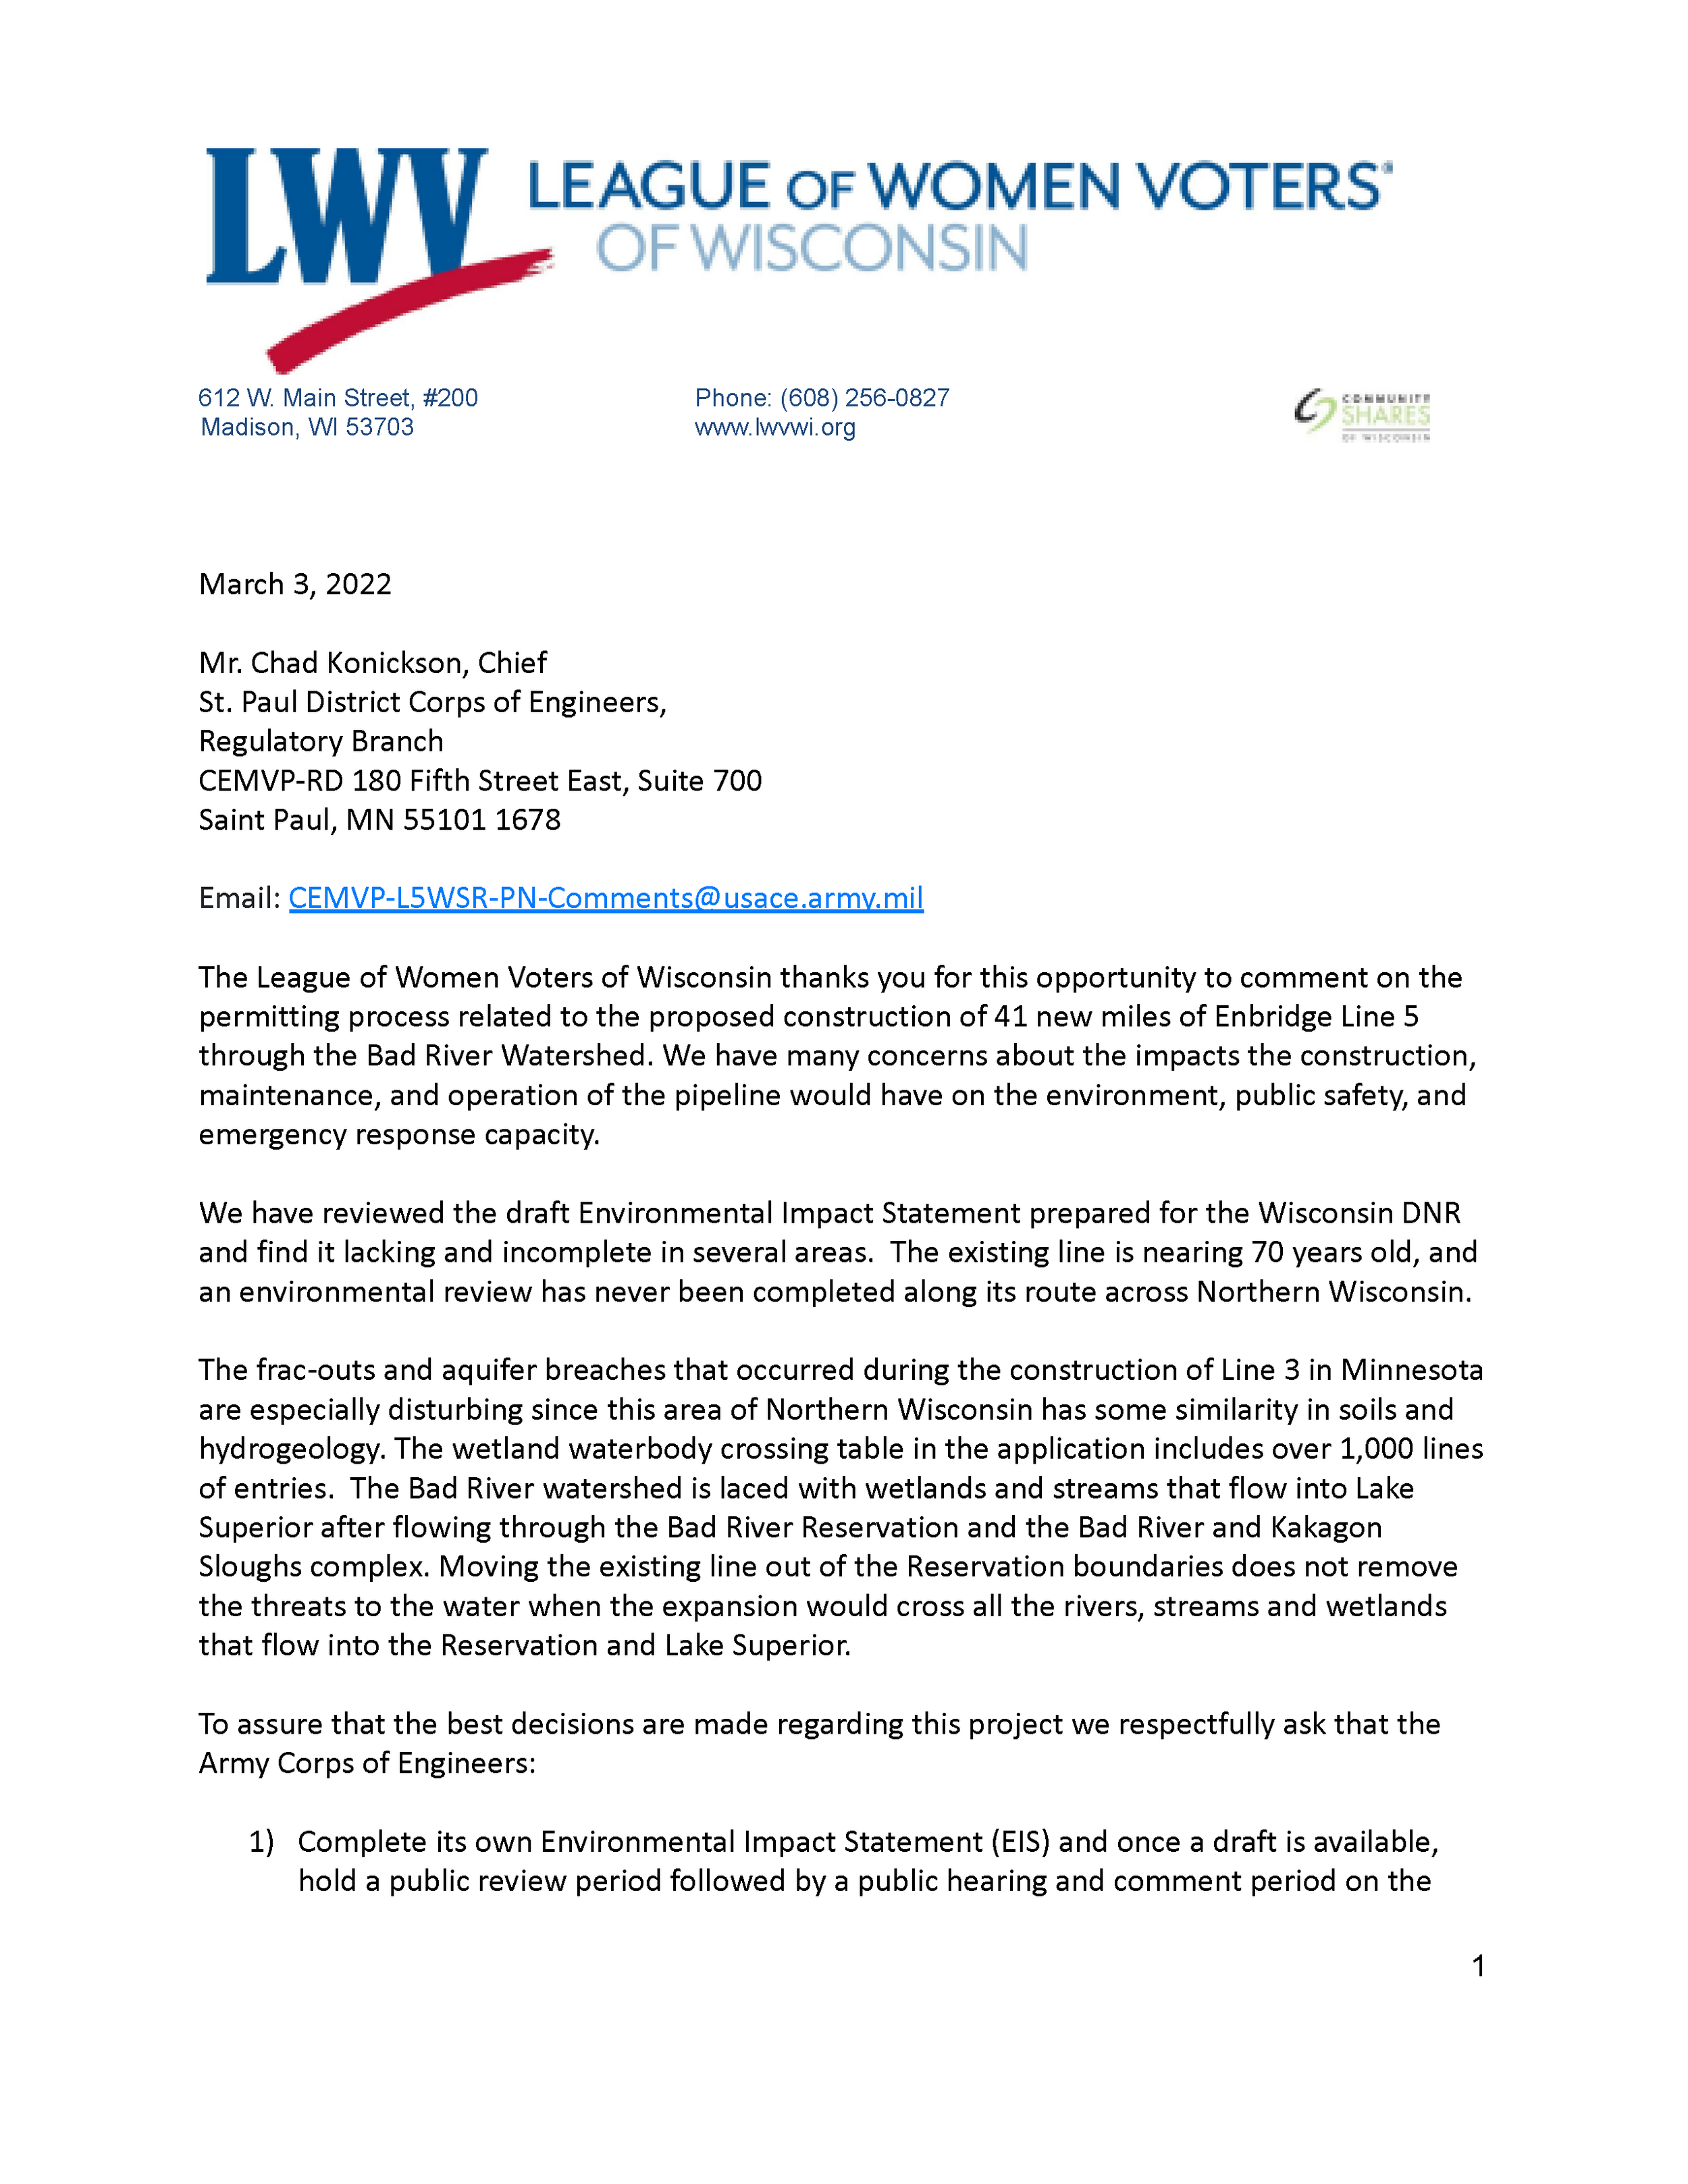 LWVWI_ACE Letter_Page_1.png